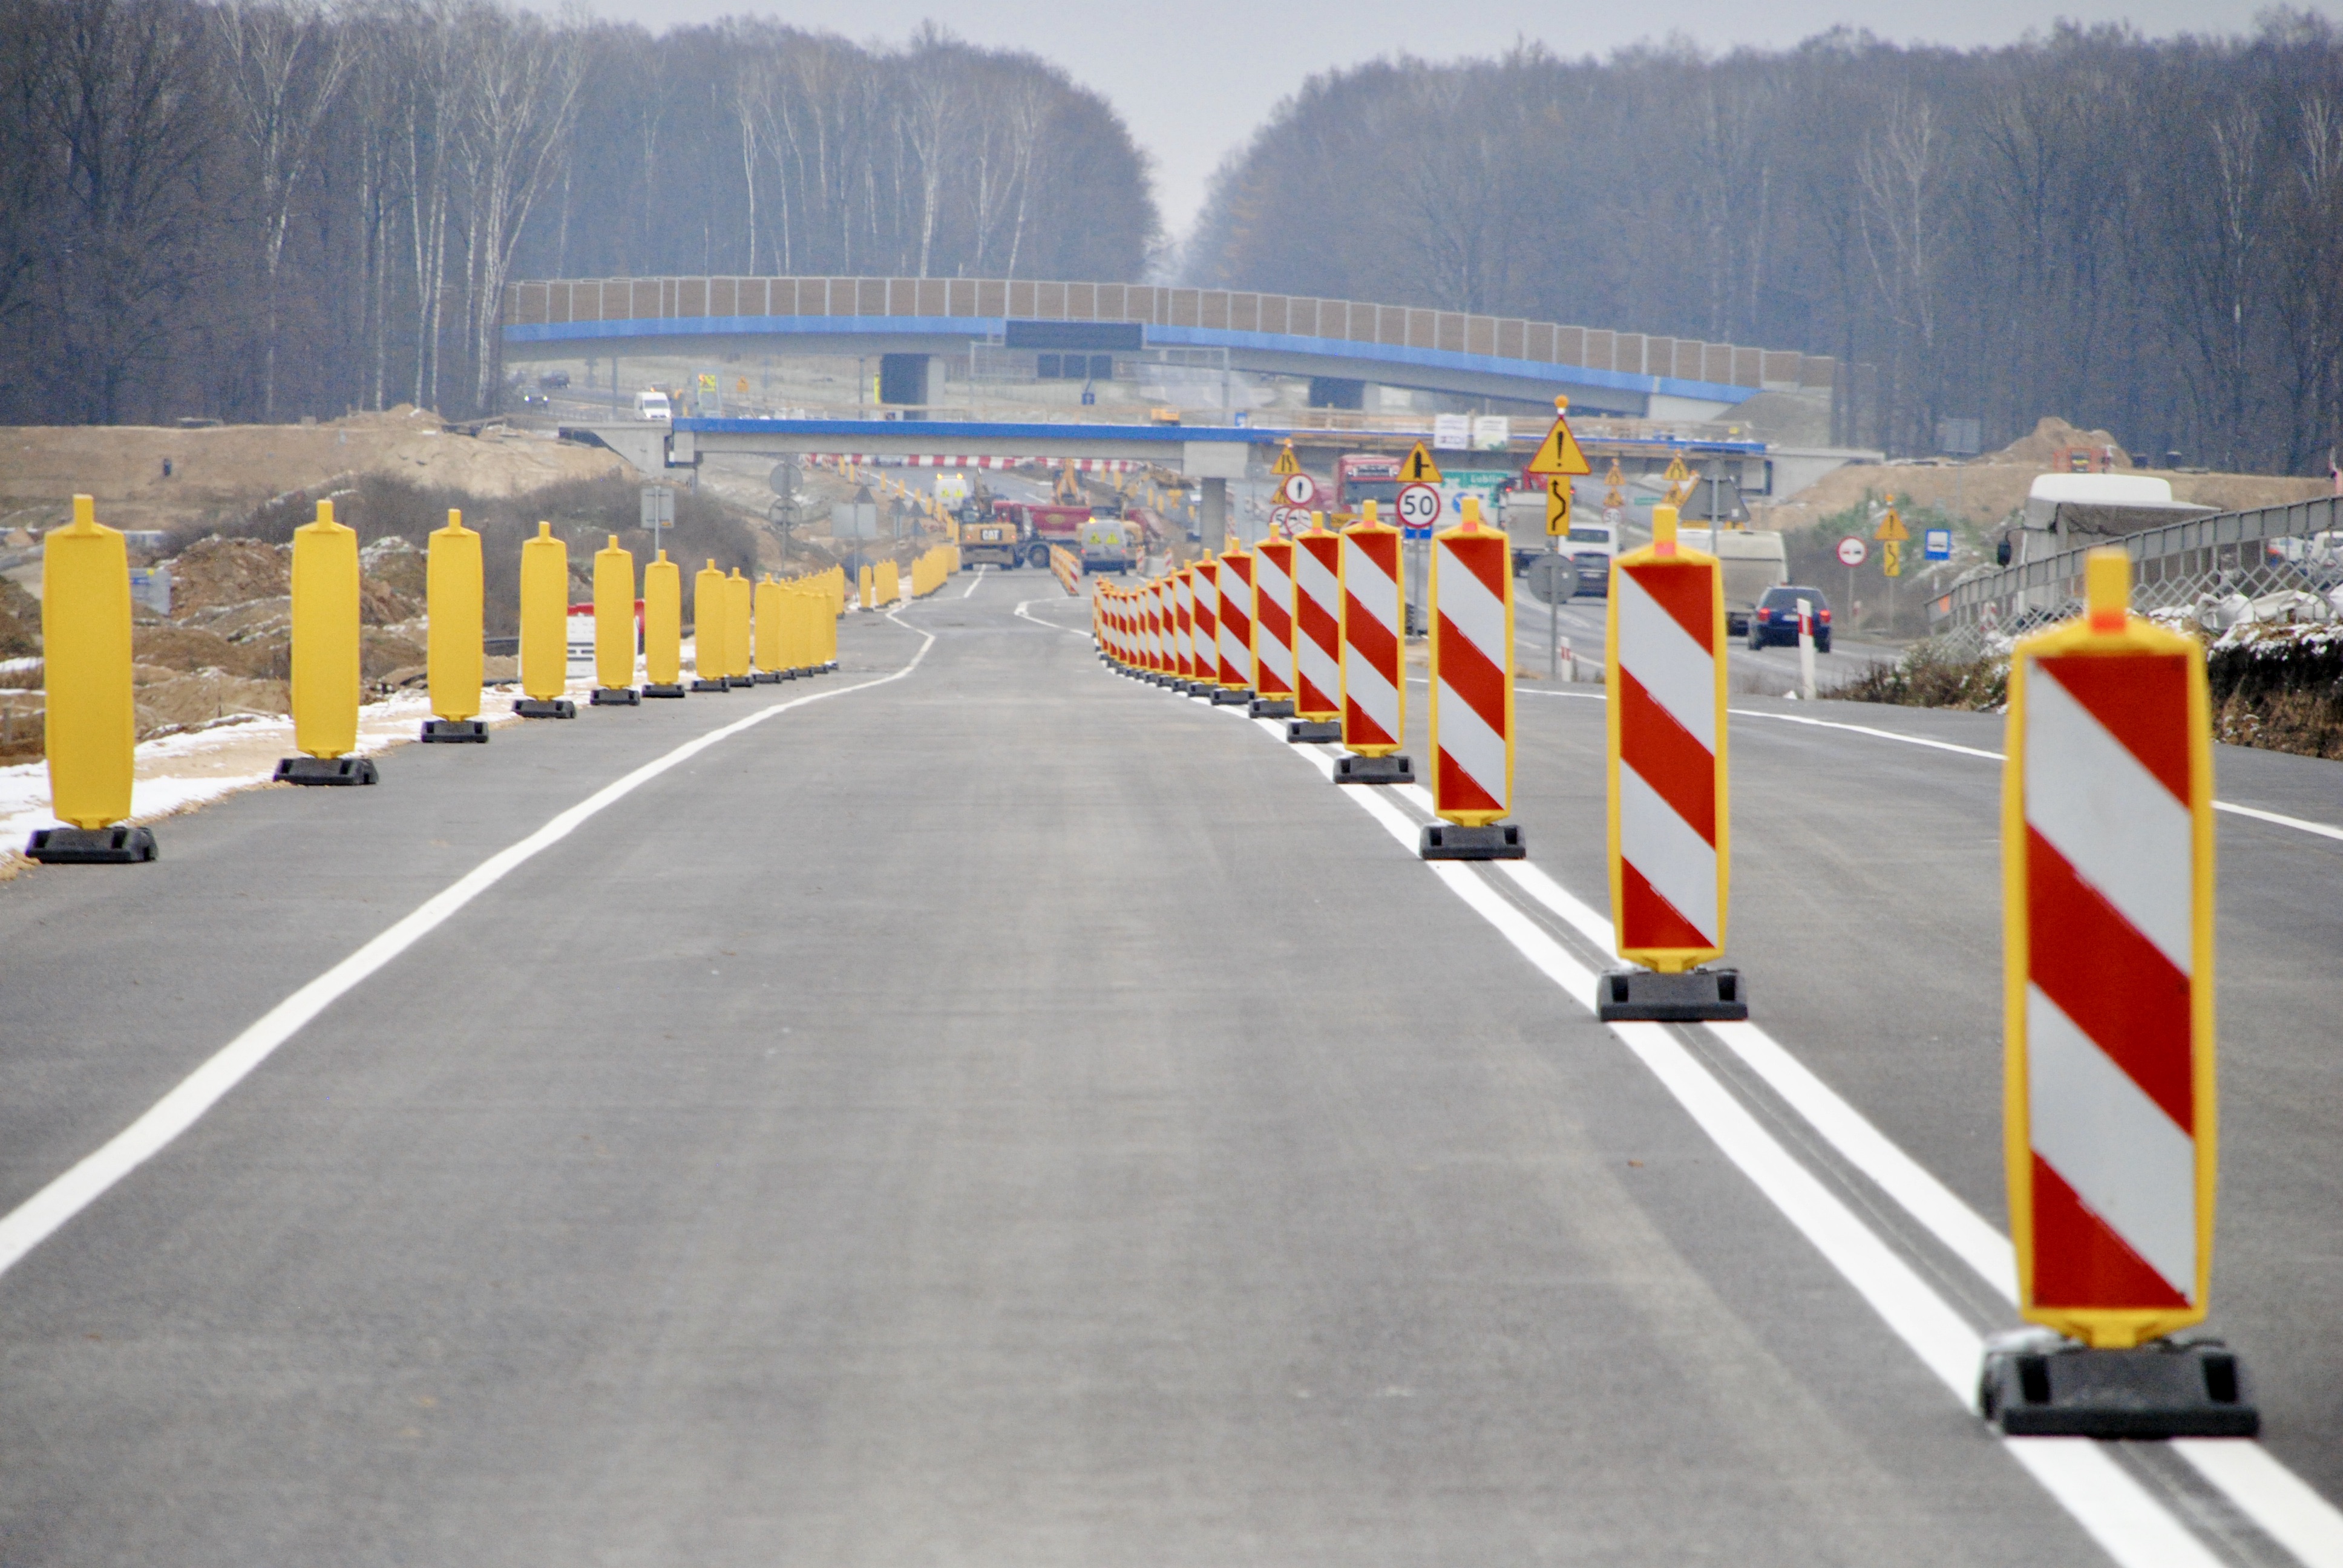 Aldesa - Project design and construction of the S19 expressway Lublin – Rzeszów, the section Lublin – Niedrzwica Duża intersection